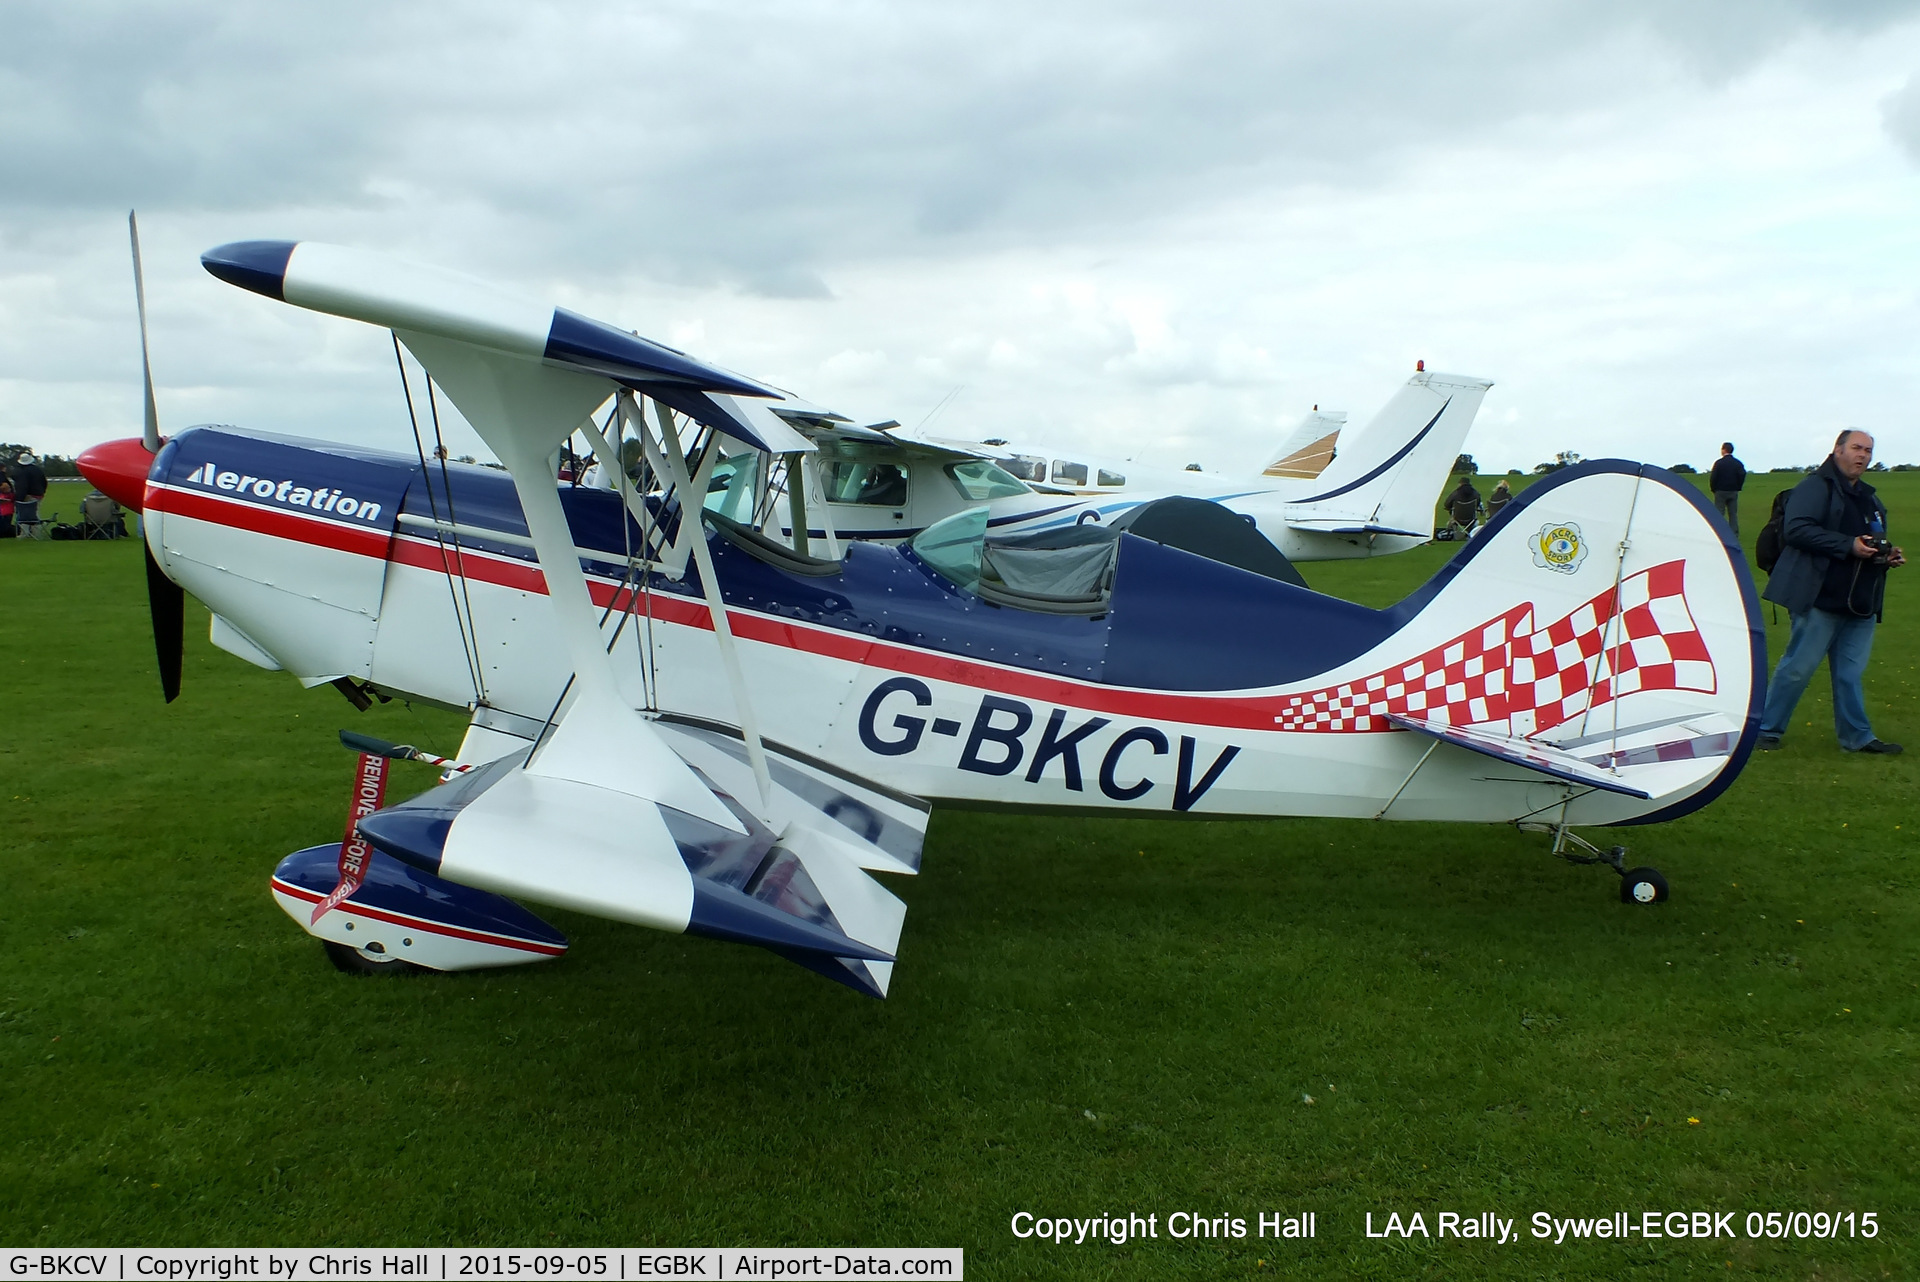 G-BKCV, 1990 EAA Acro Sport II C/N PFA 072A-10776, at the LAA Rally 2015, Sywell